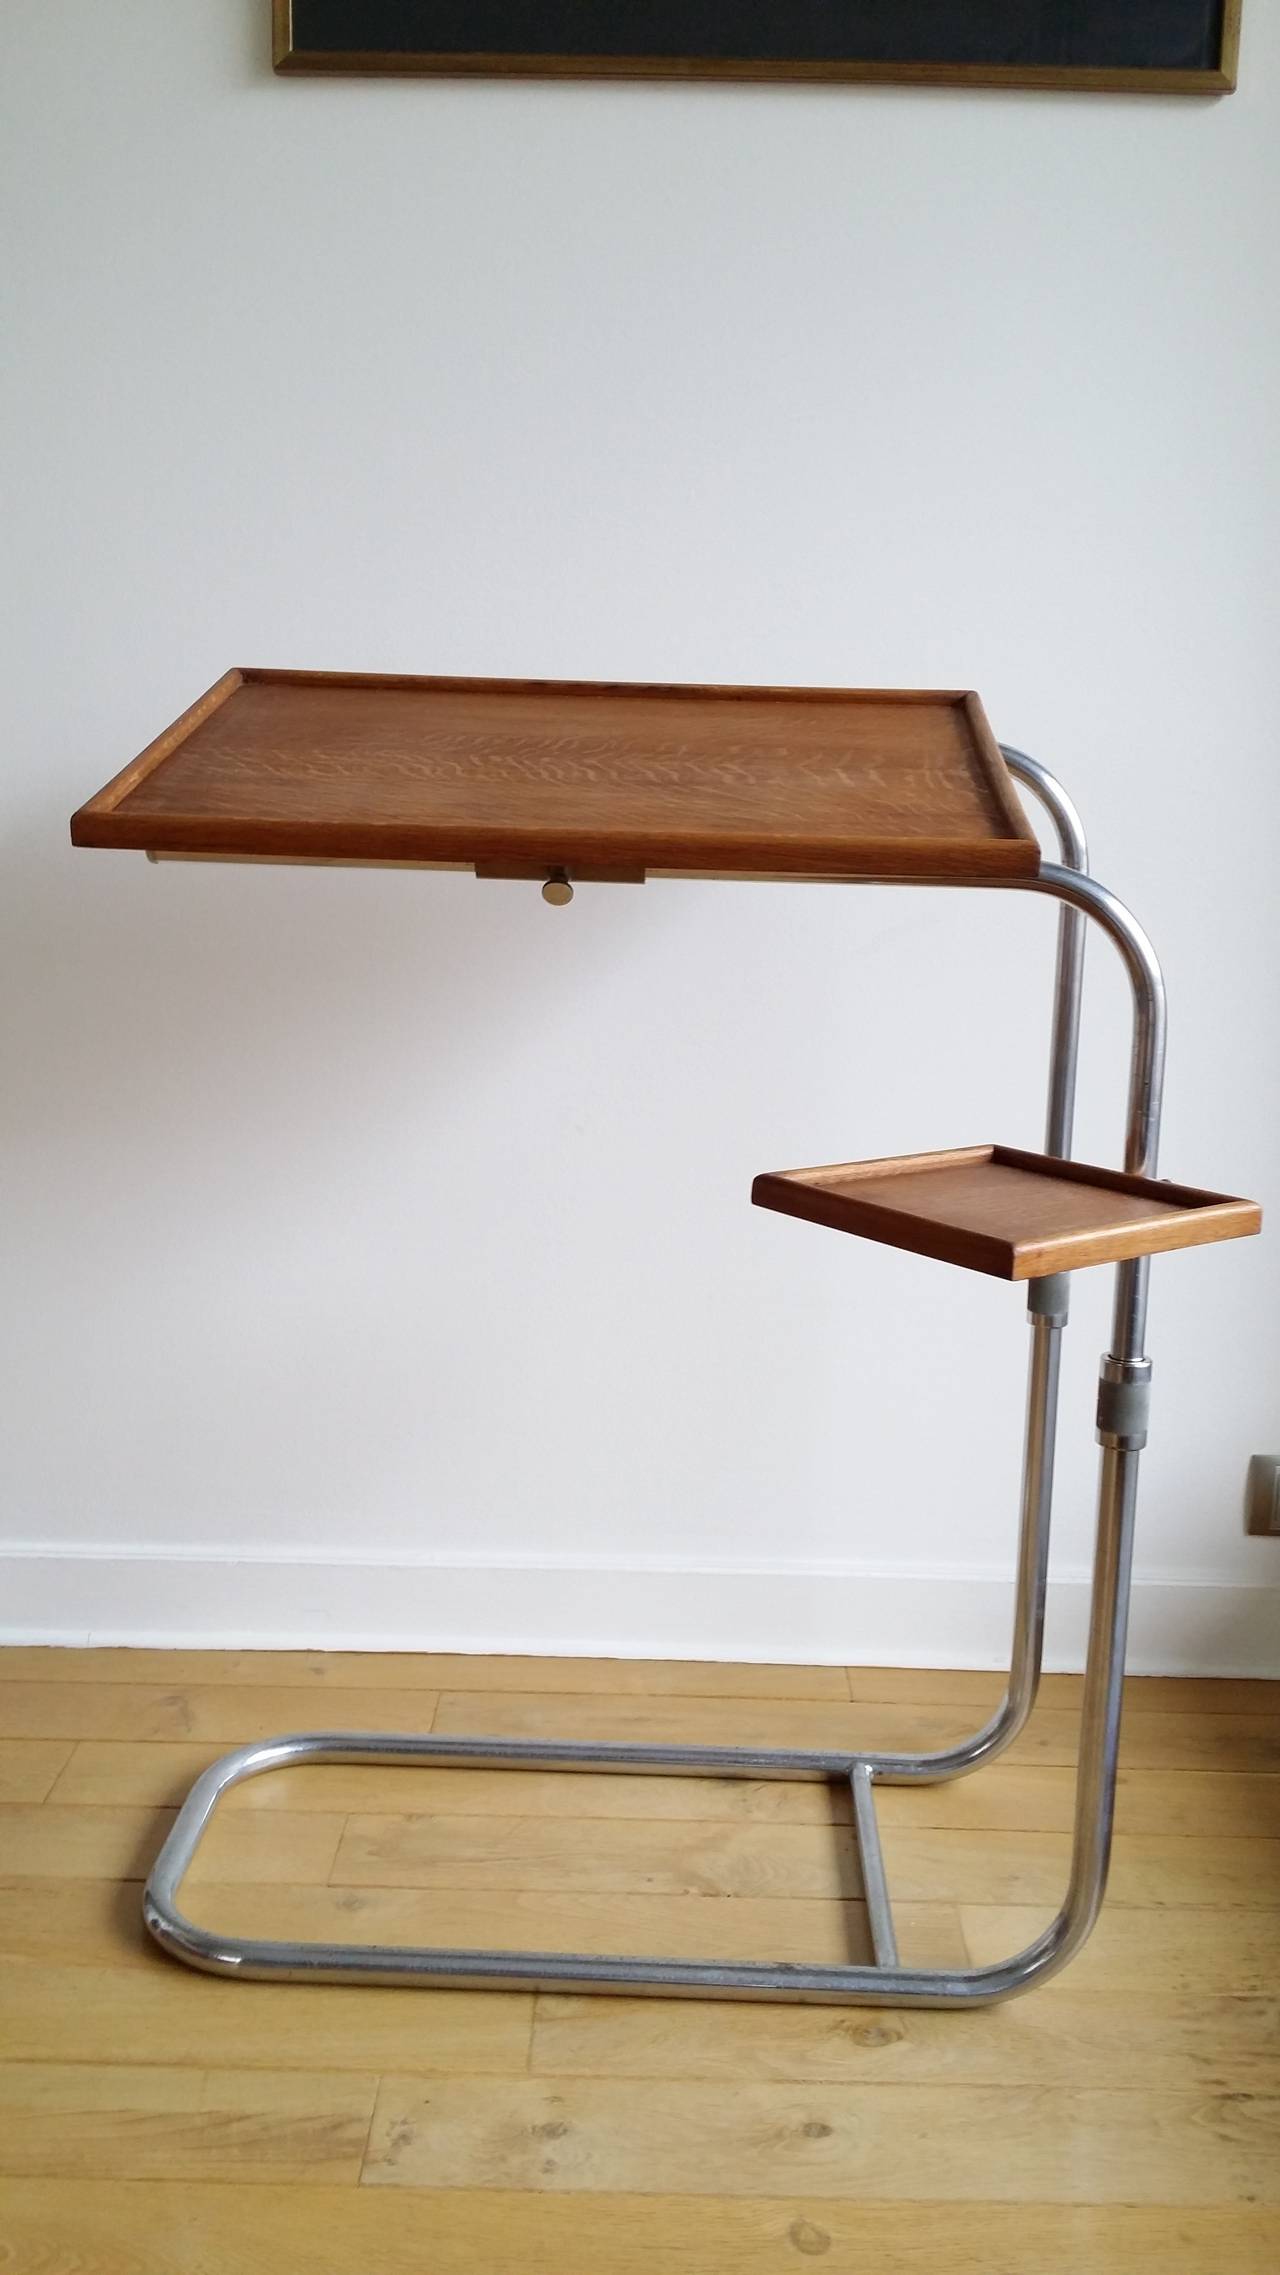 French L'adaptable two tiered adjustable table - France 1950's - Ipso Facto